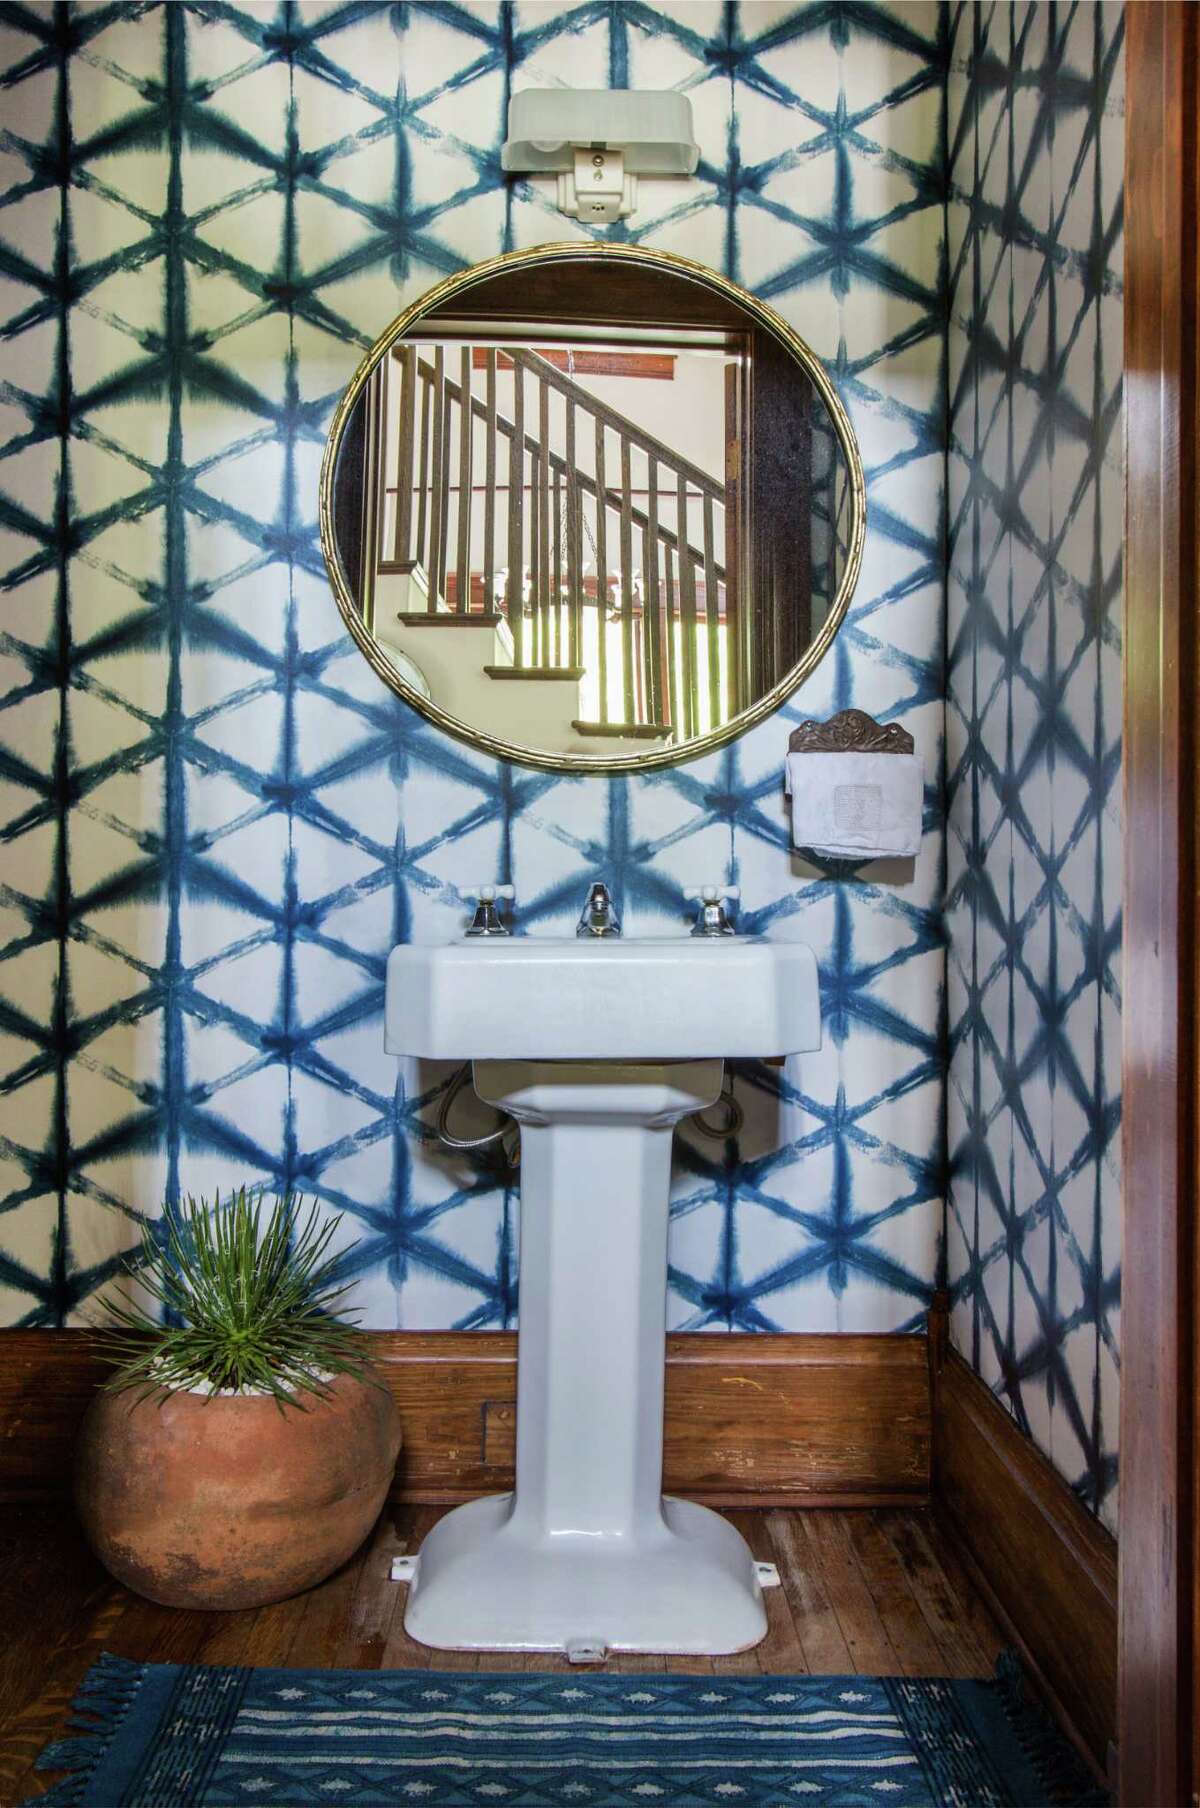 The powder room in the home of Aimee Woodall and Tyler Crabtree.